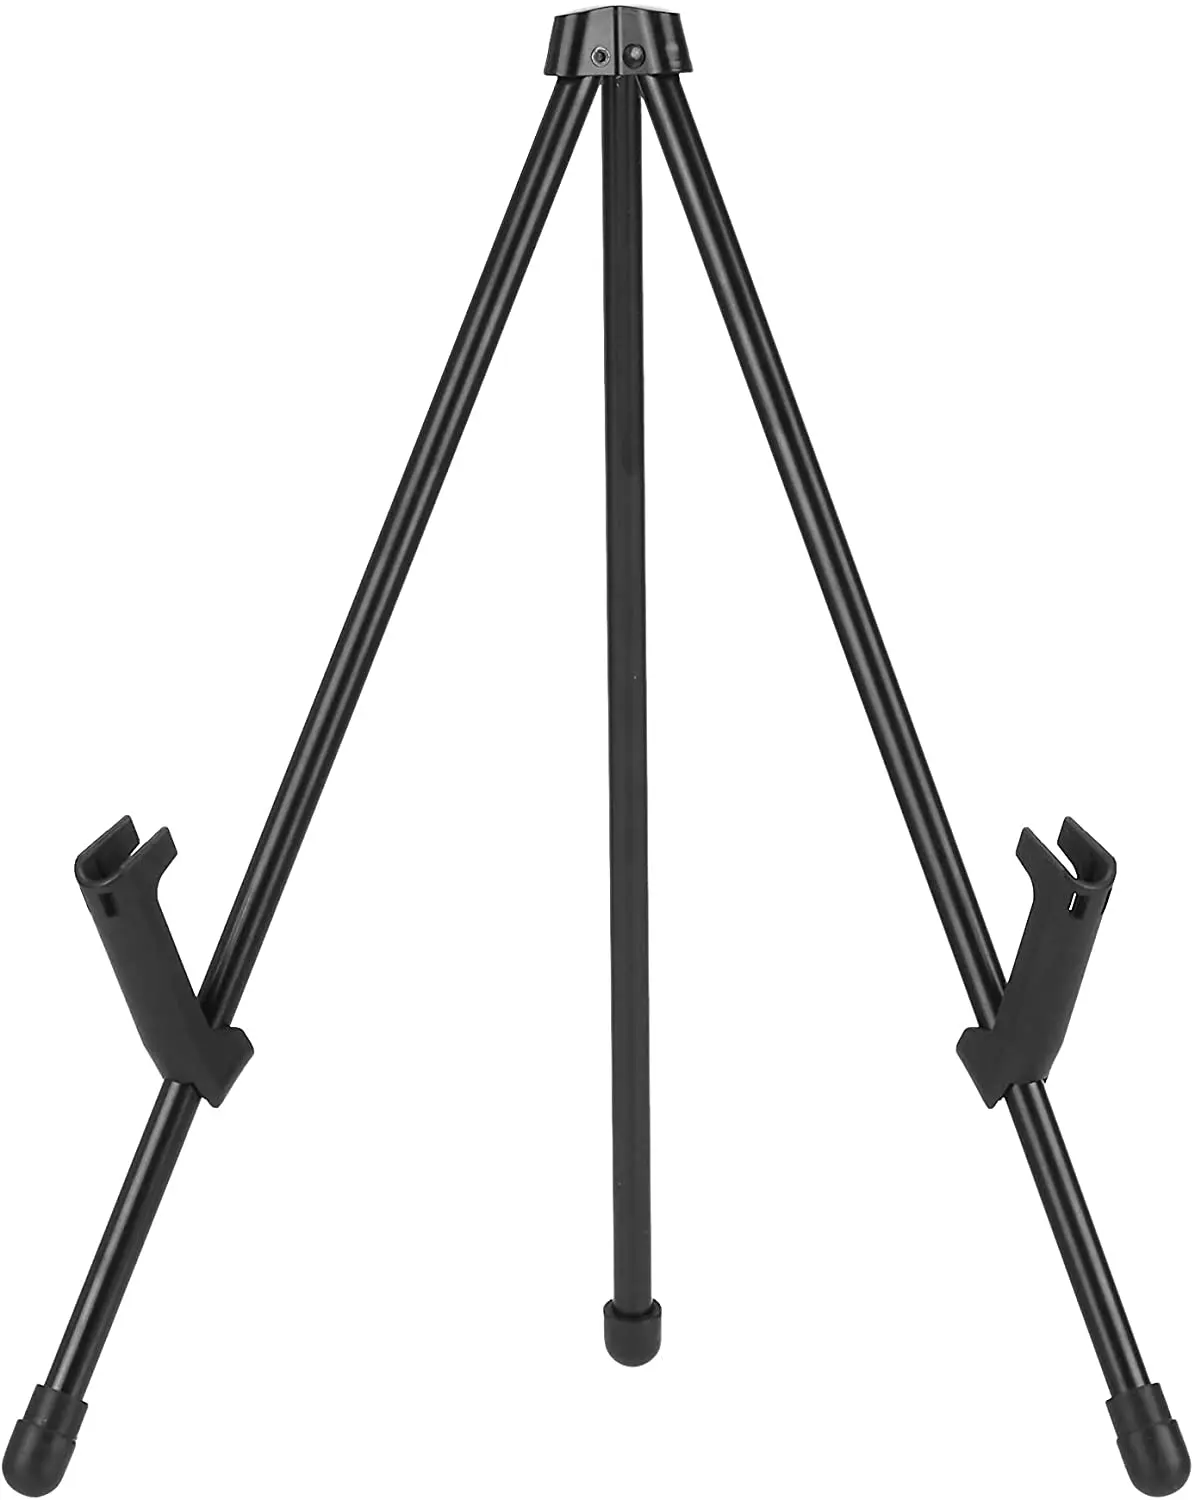 Tabletop Instant Easel – Stativ, Supports 5 Pfund